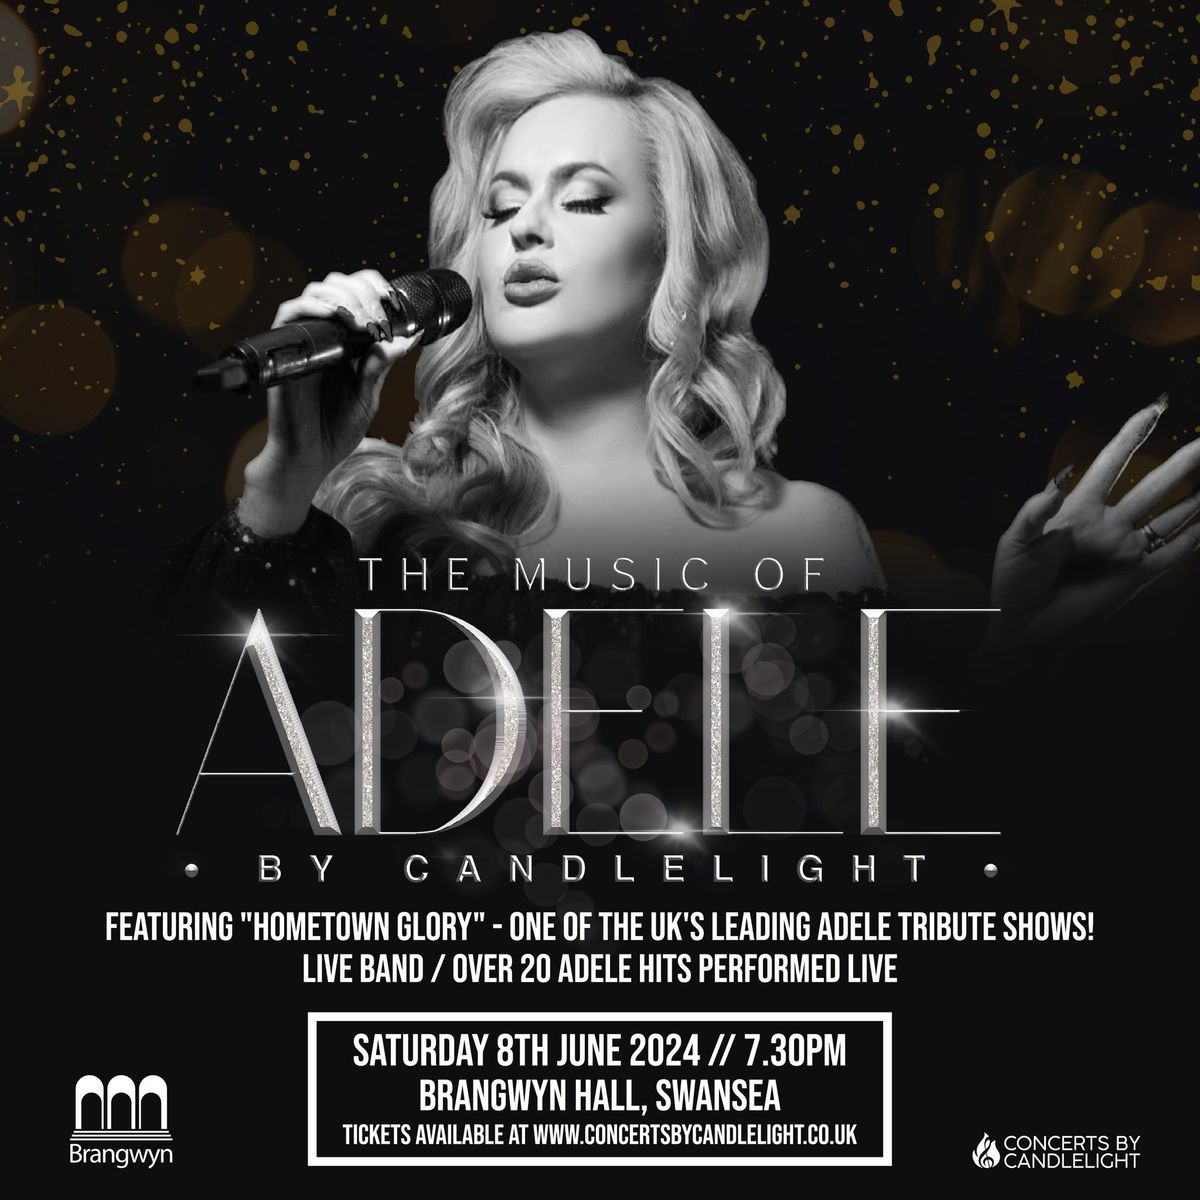 The Music Of Adele By Candlelight At Brangwyn Hall, Swansea